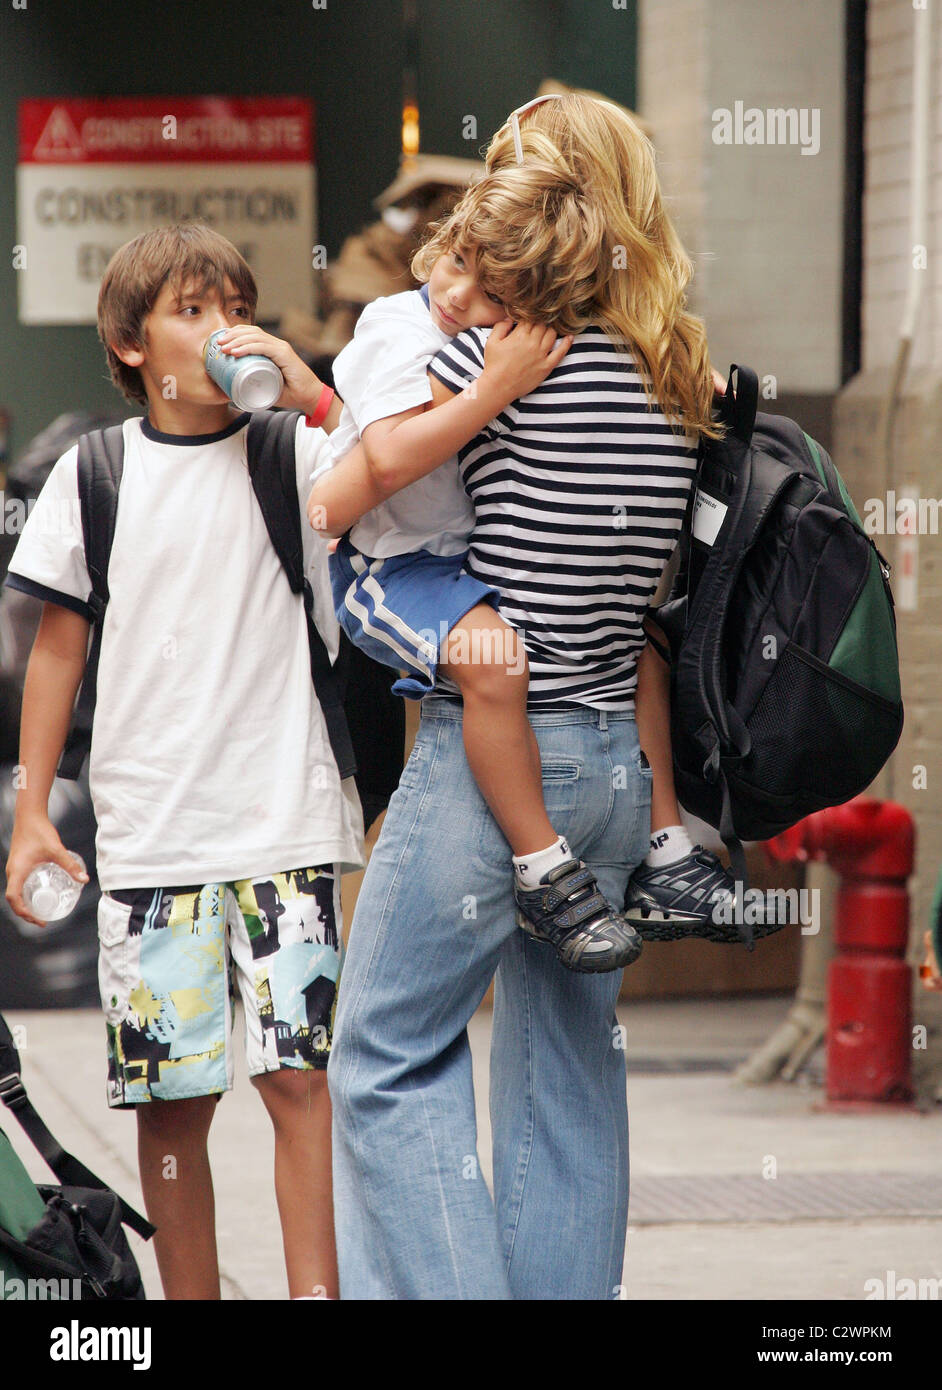 Michael Consuelos, Kelly Ripa and Joaquin Consuelos talk show host Kelly Ripa out and about with her children New York City, Stock Photo